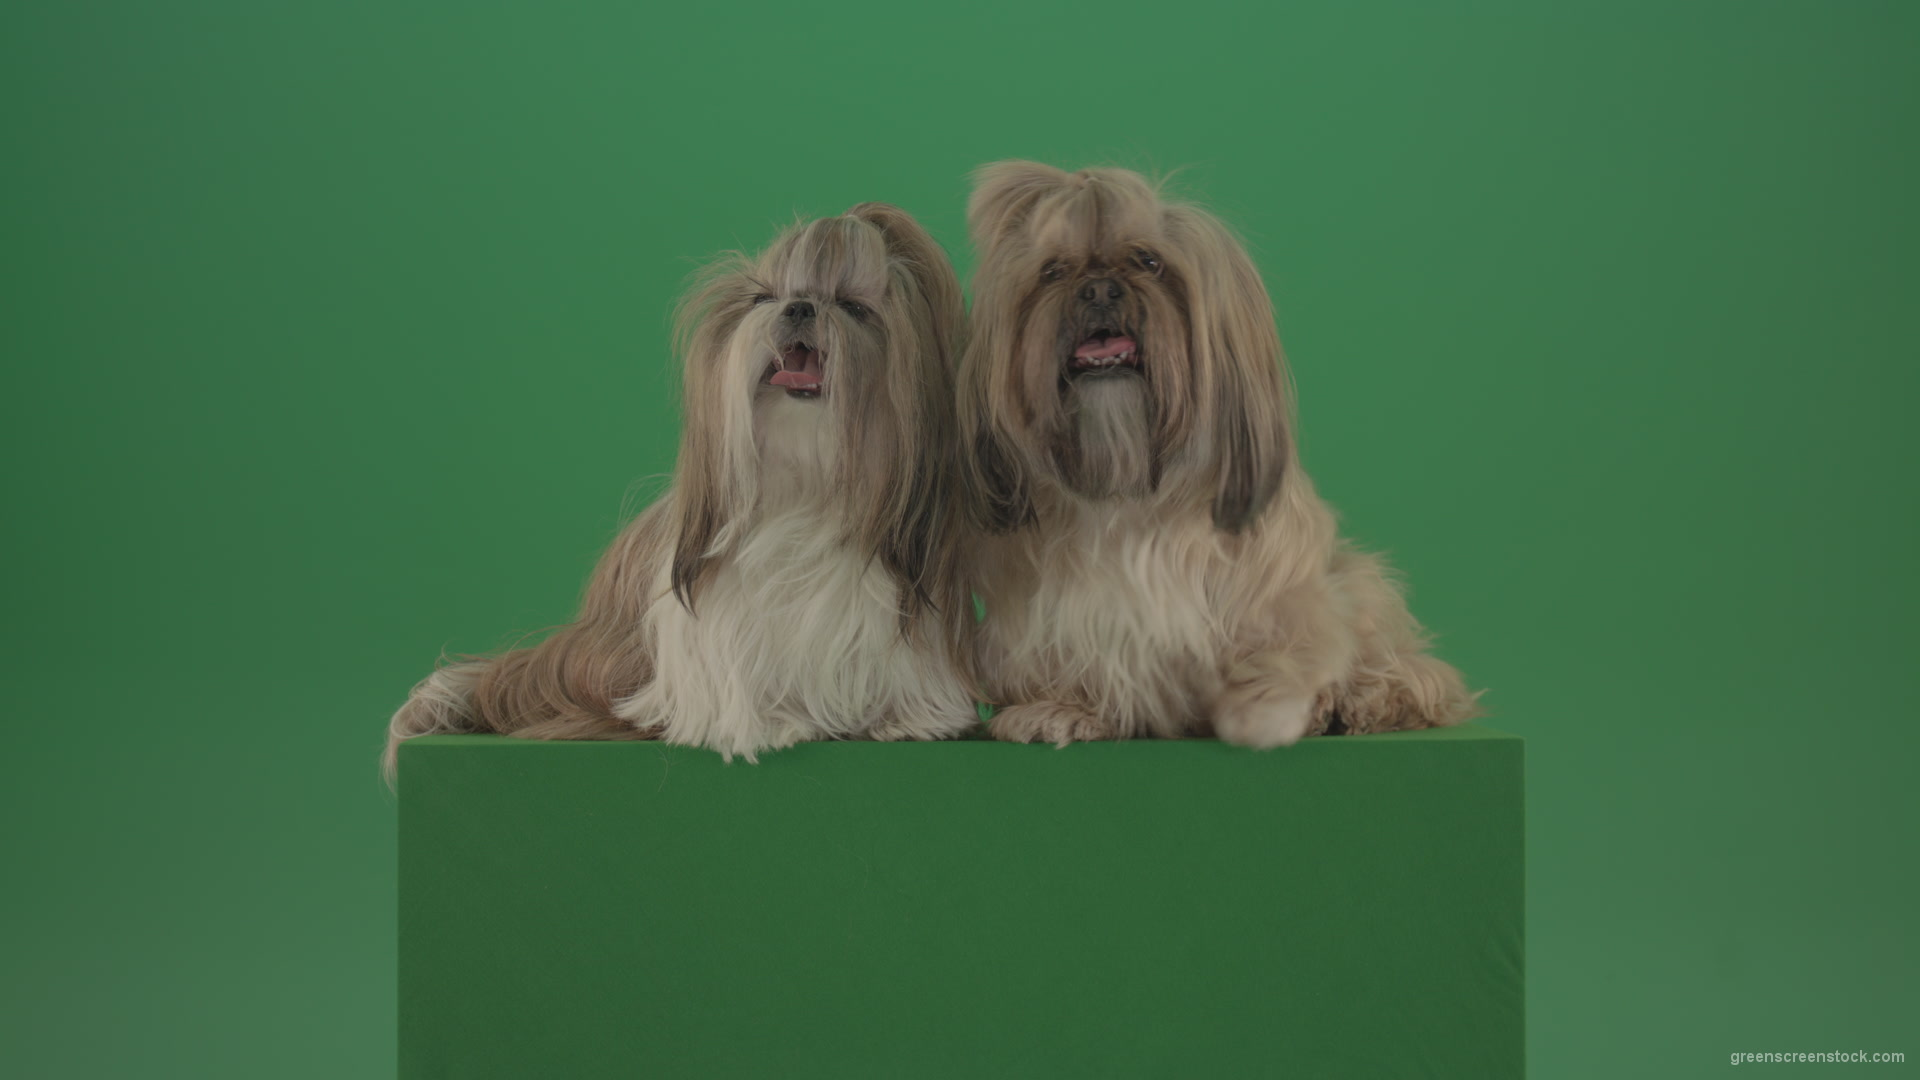 Award-winning-Small-toy-Shihtzu-Dogs-isolated-on-green-screen_009 Green Screen Stock